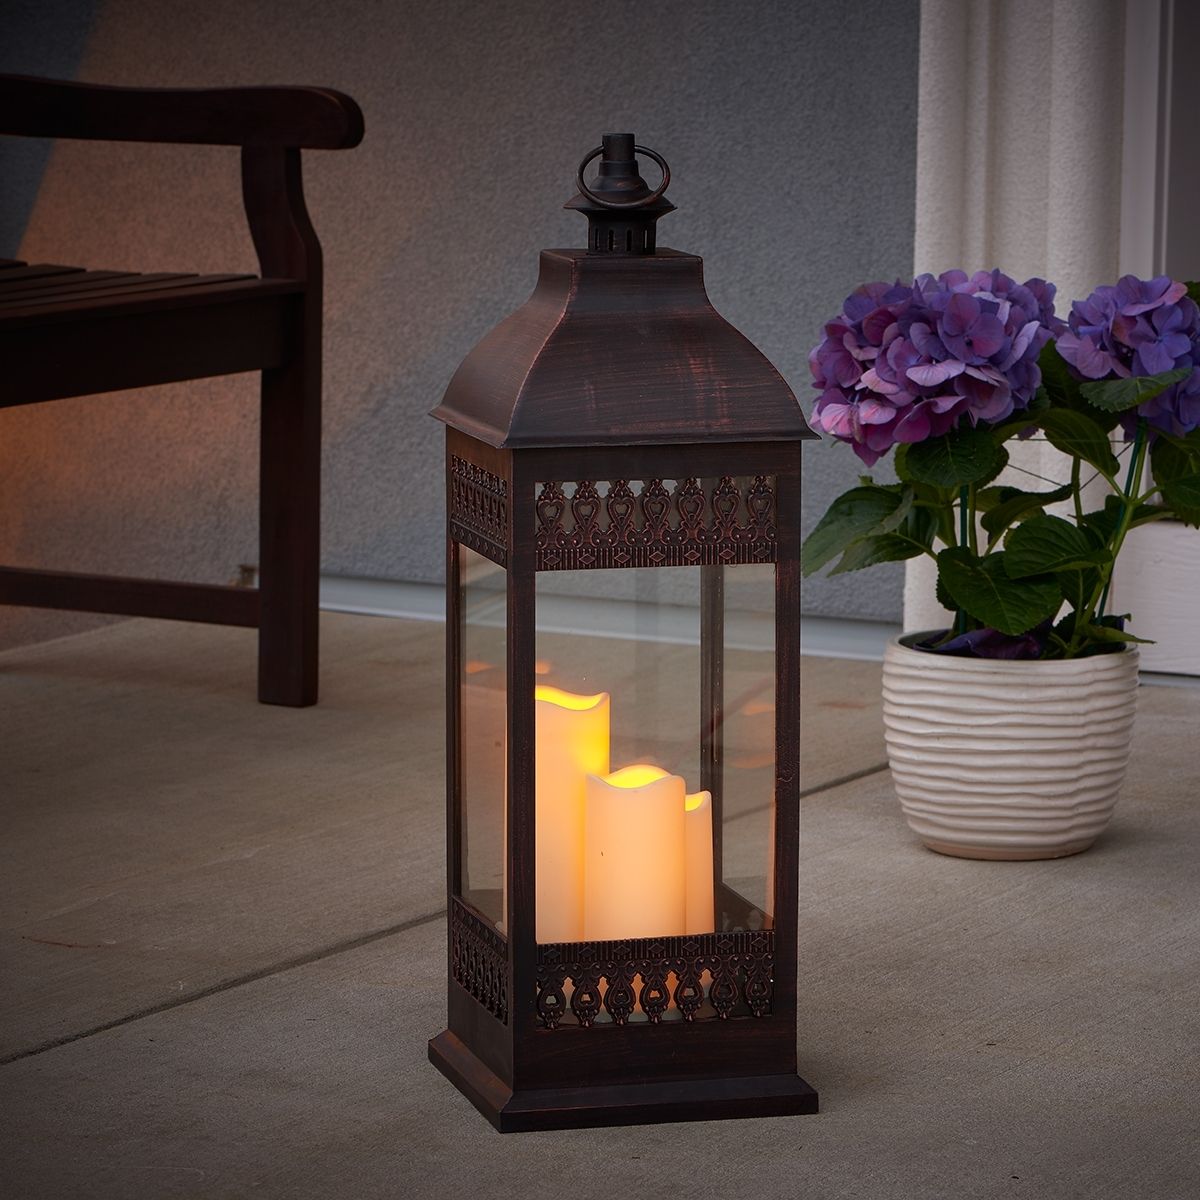 Outdoor Lanterns With Flameless Candles Within Preferred Lantern With Pillar Triple Led Candles Patio Garden Outdoor Ambient (View 1 of 20)